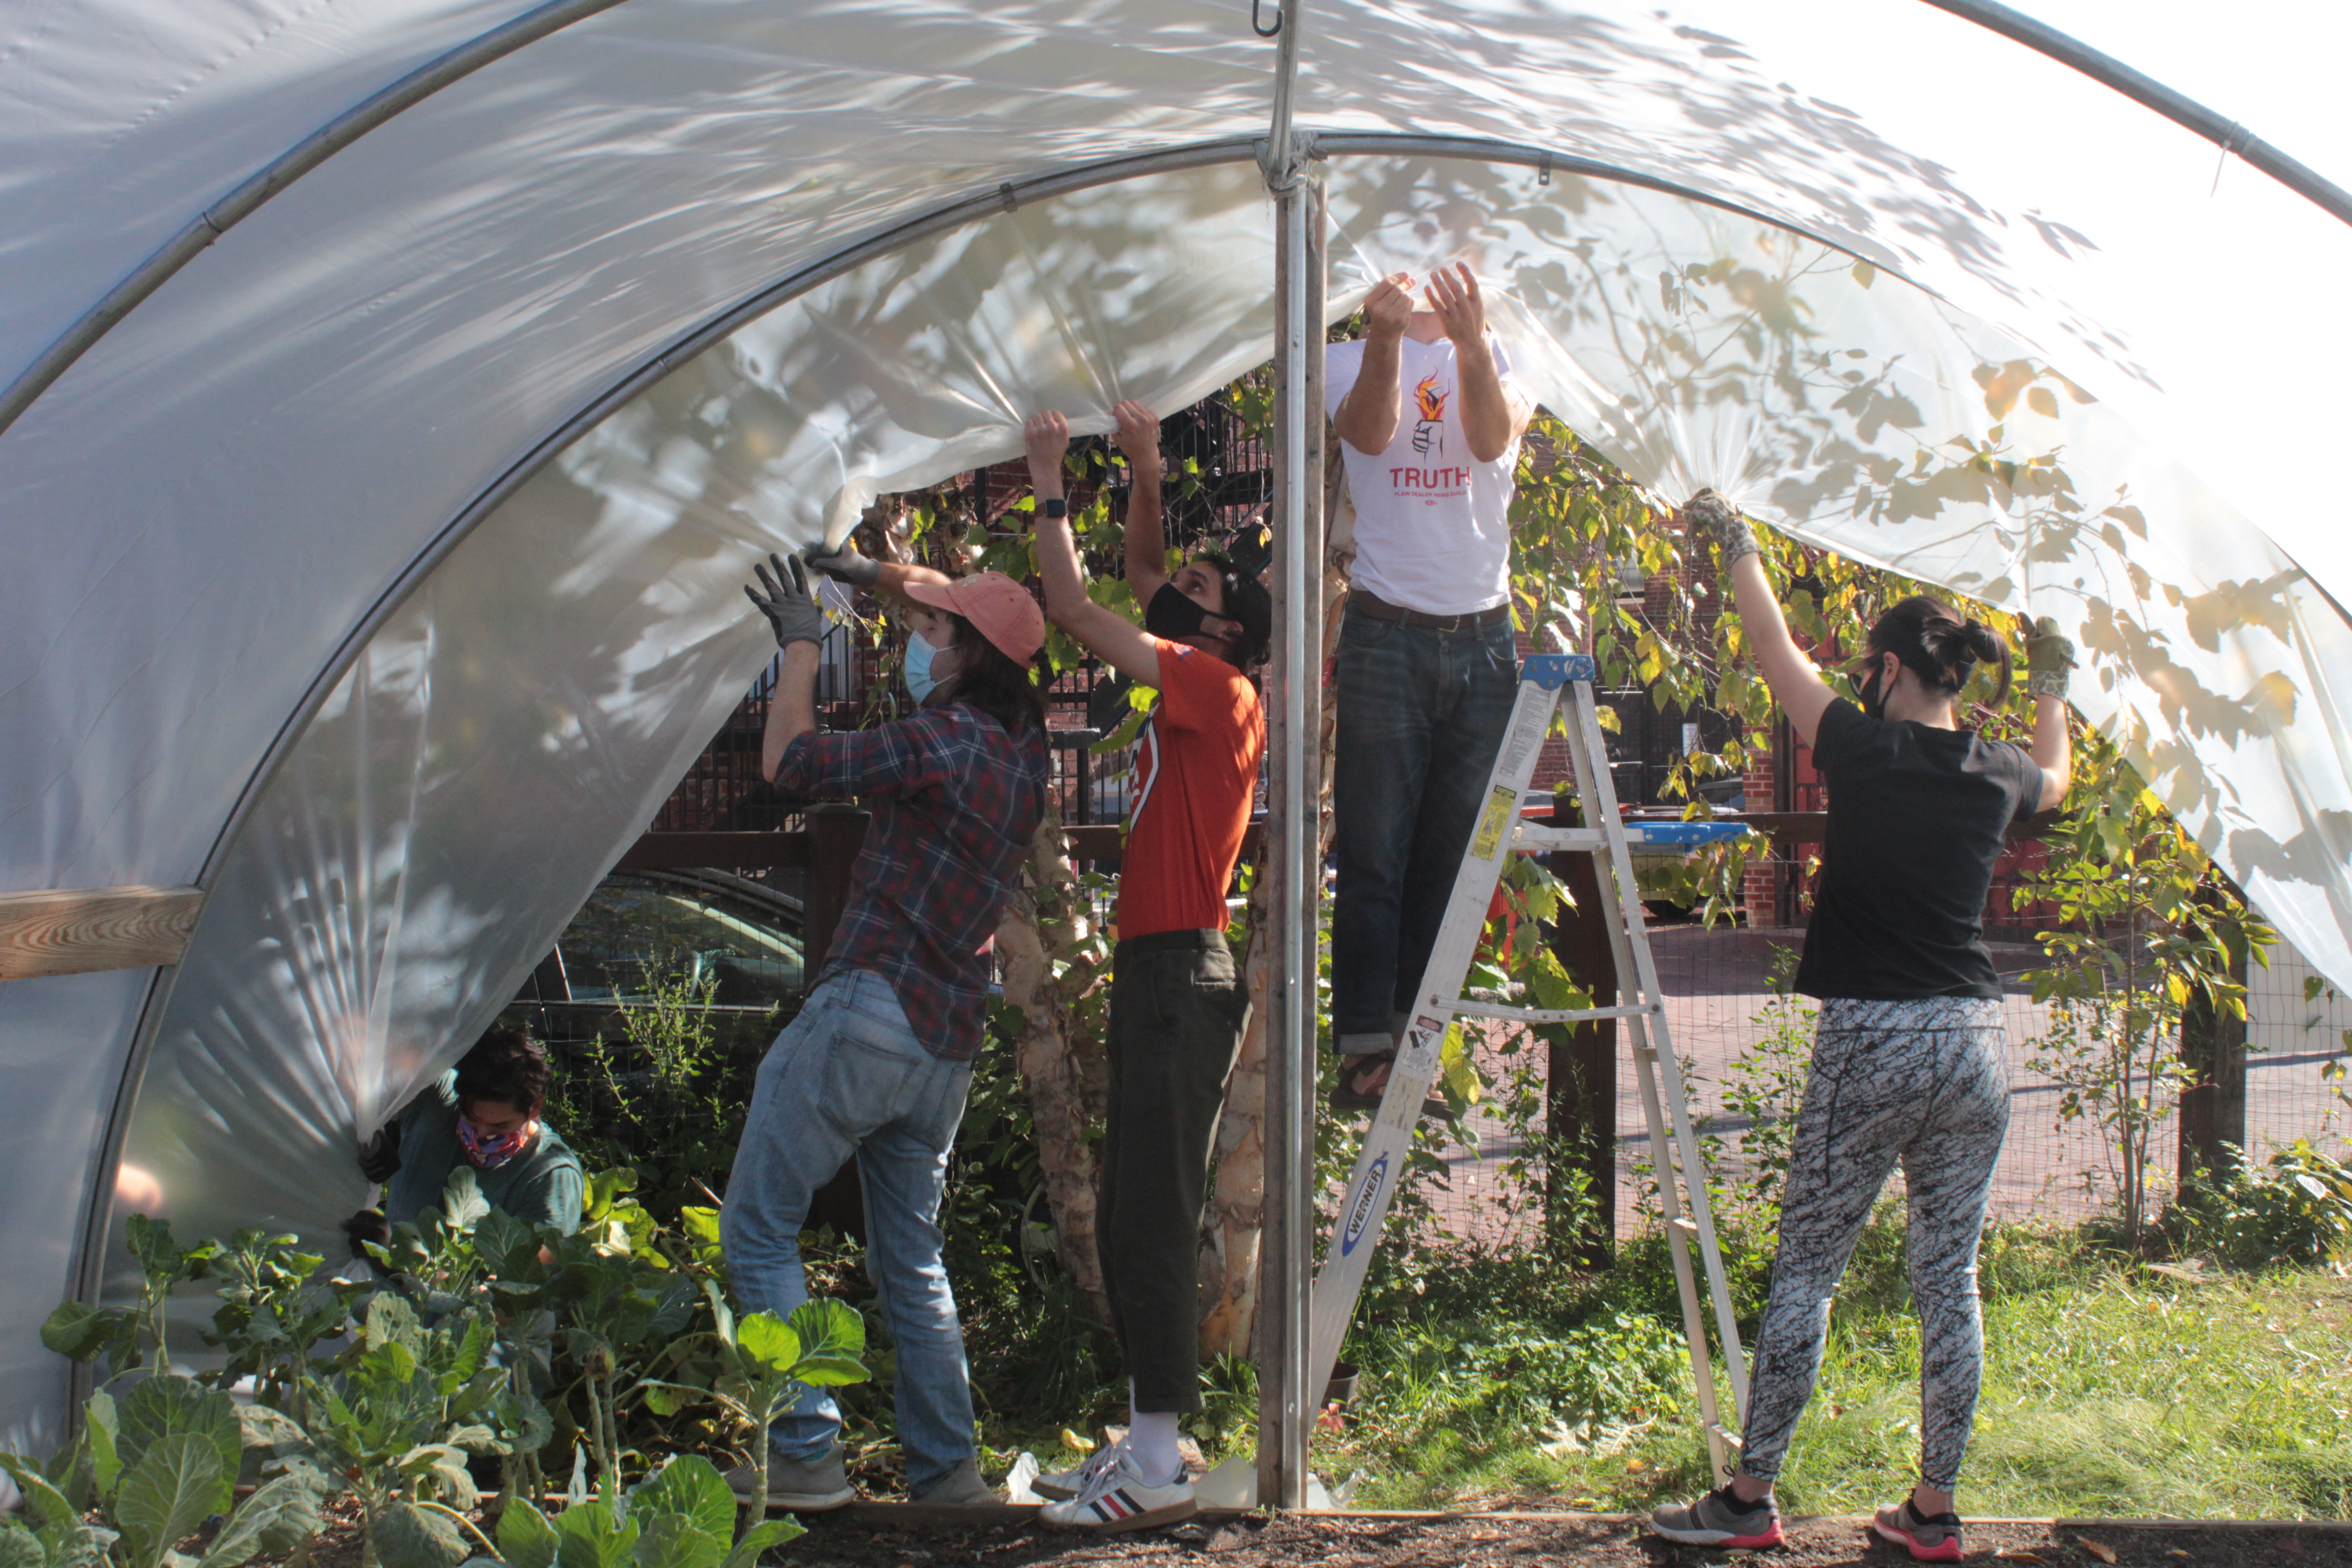 Workers in the hoop house, with plastic cover